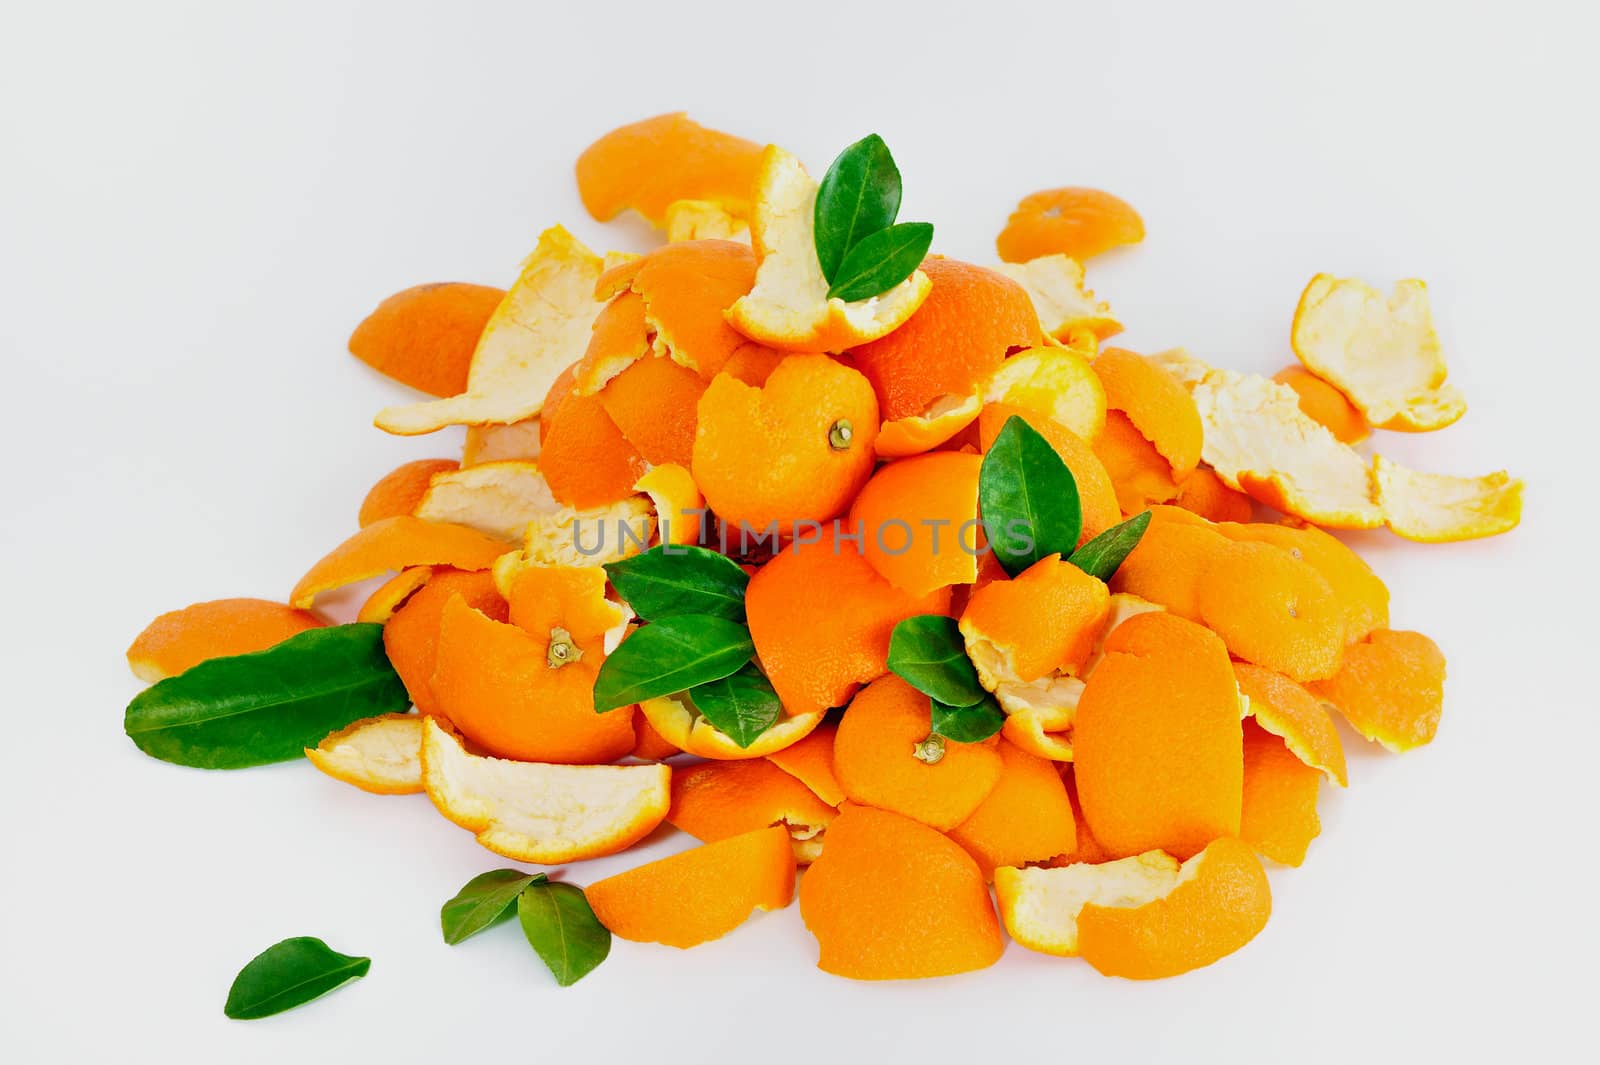 Peel of ripe oranges mixed with green leaves